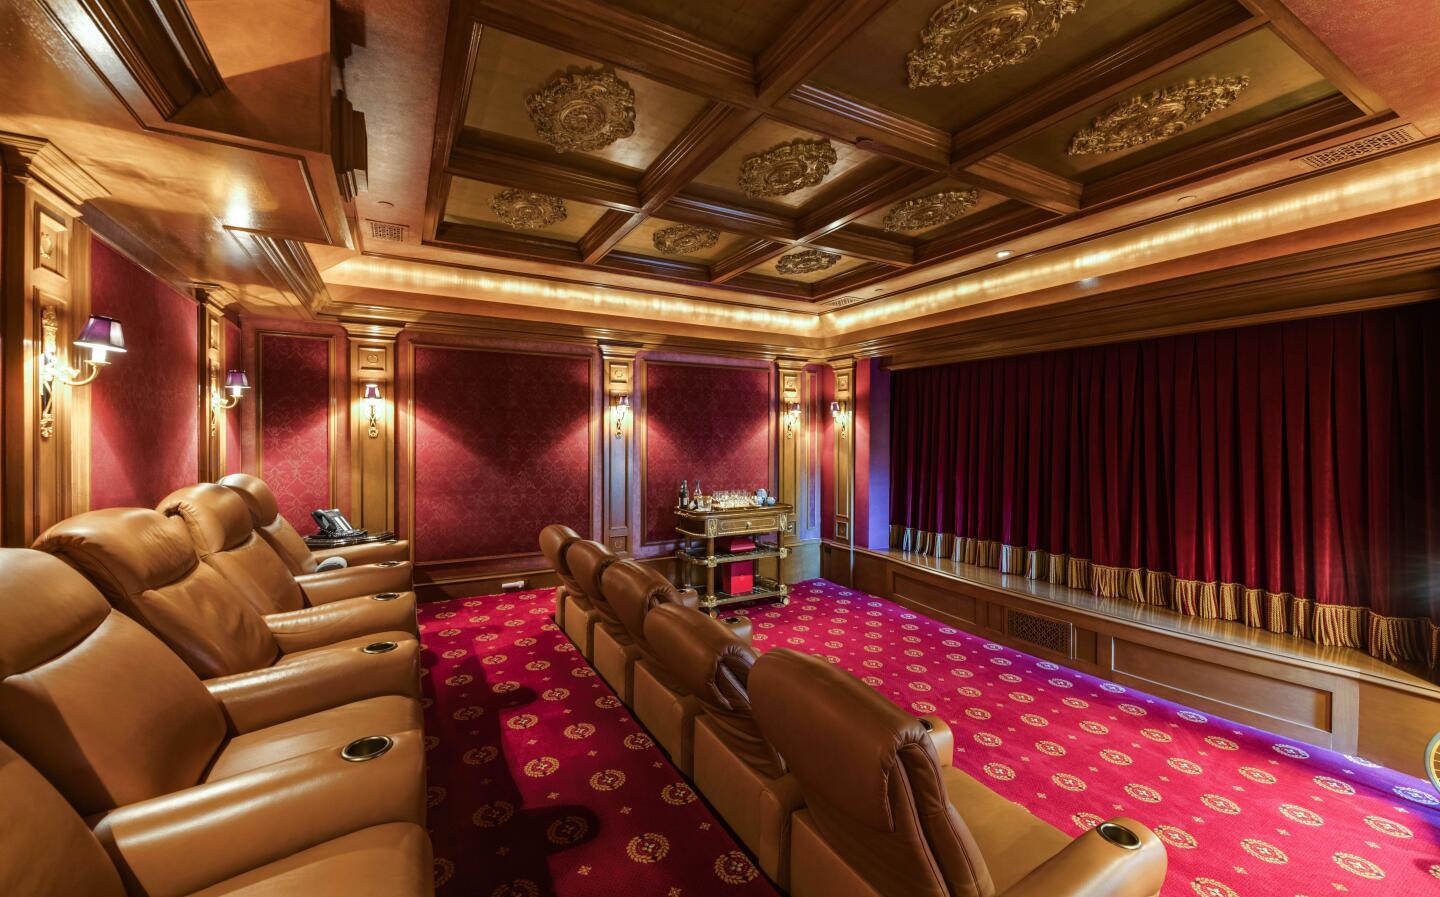 The carpeted movie theater with leather recliners an decorative panels on the ceiling.